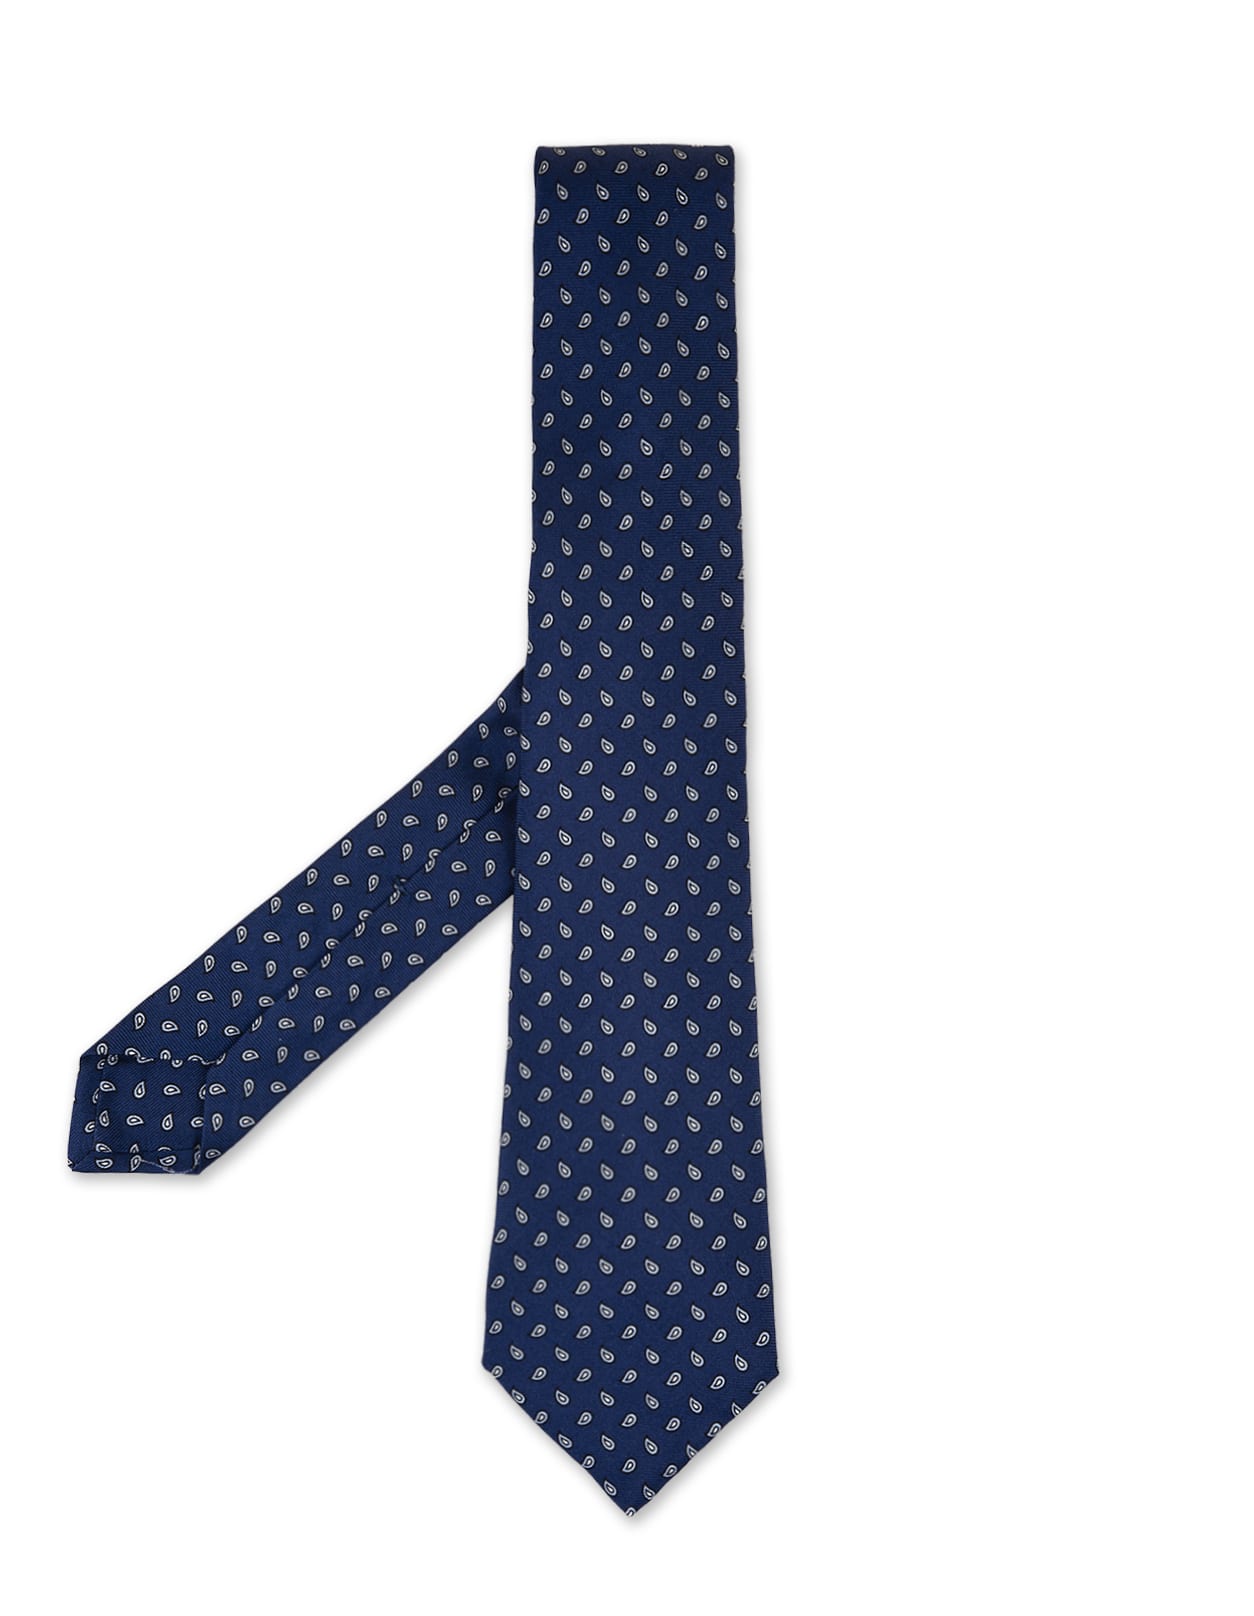 Blue Tie With Drops Pattern